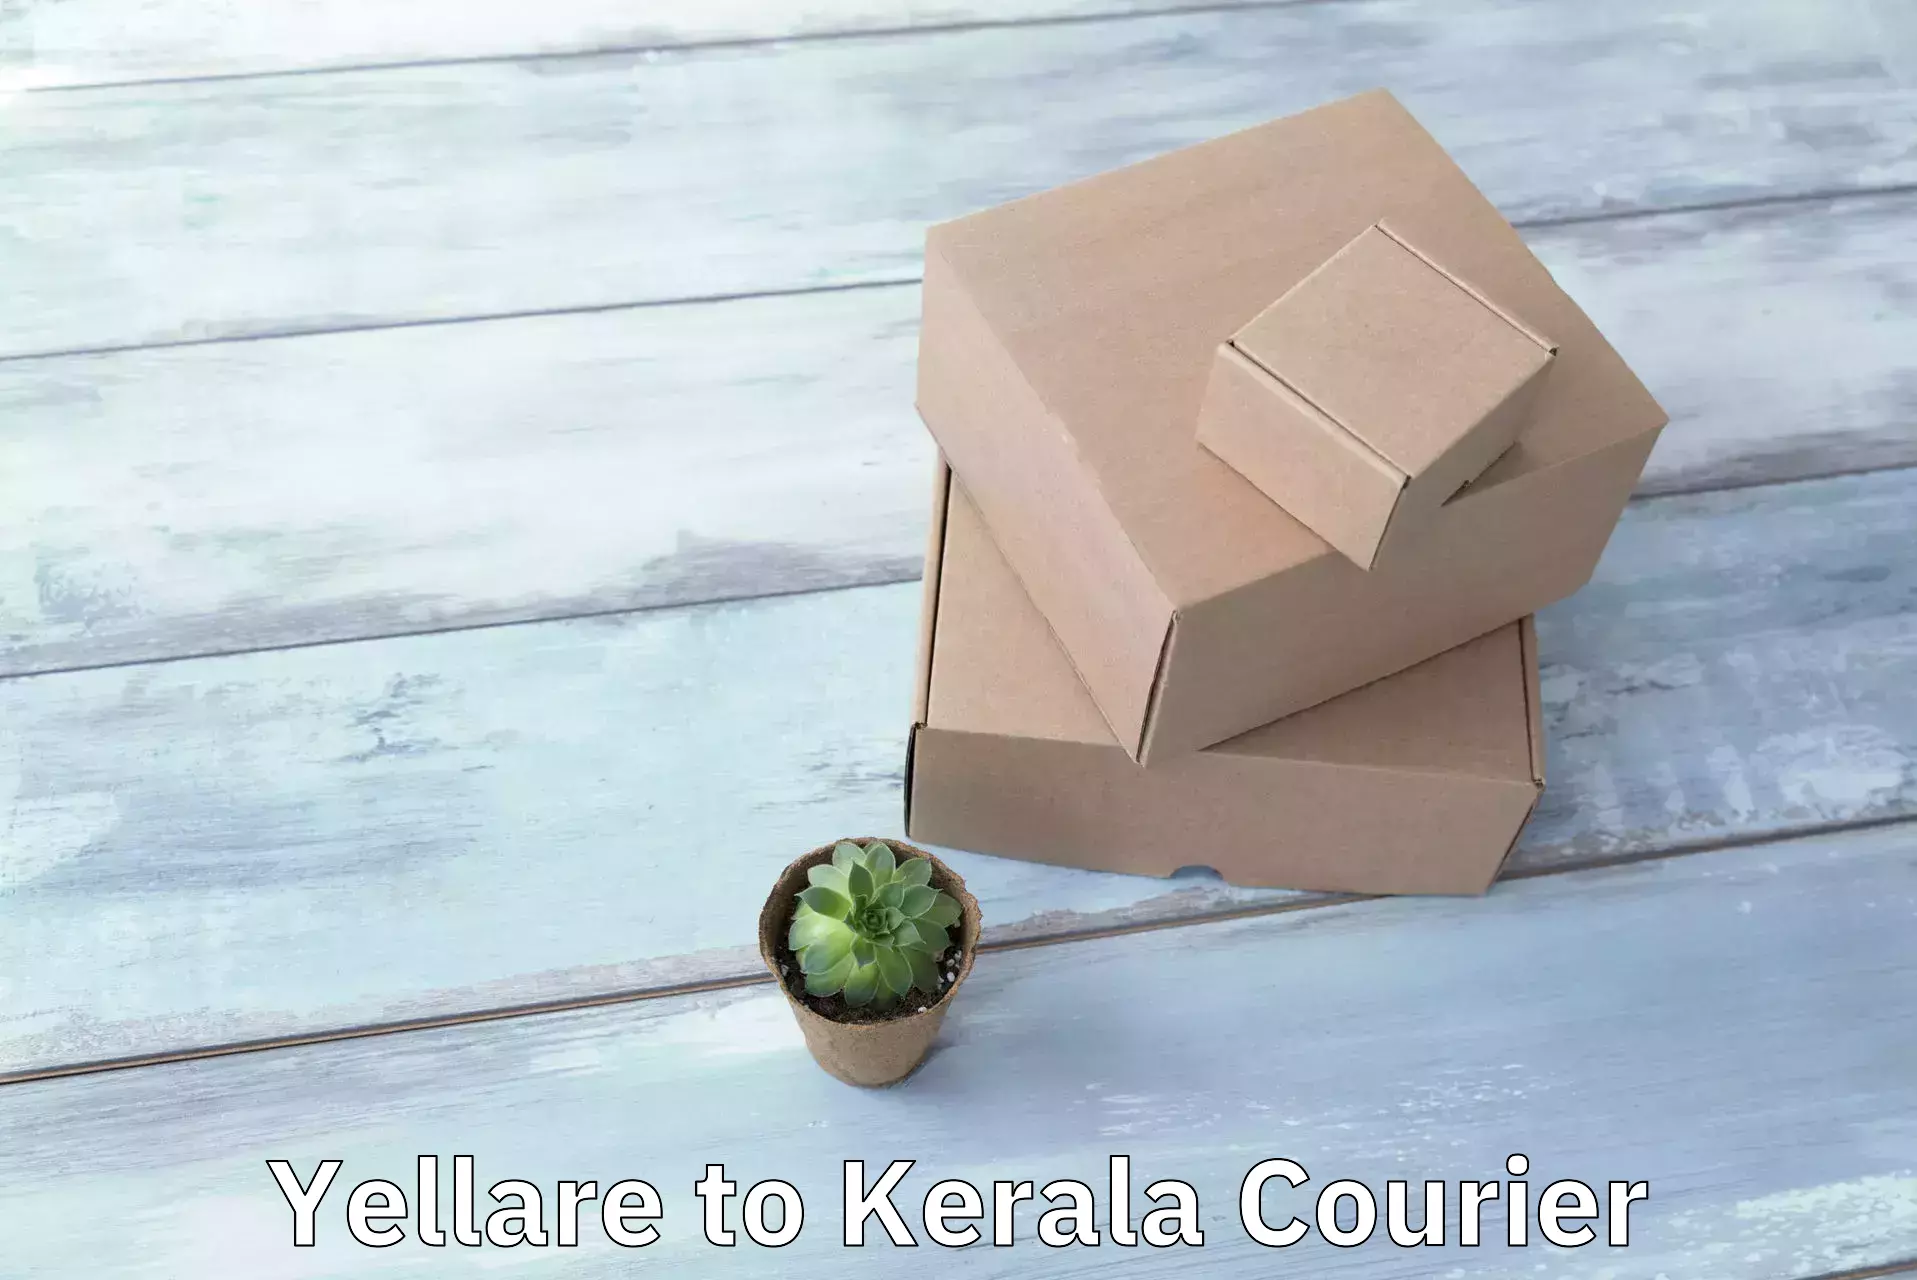 Rapid freight solutions Yellare to Kerala